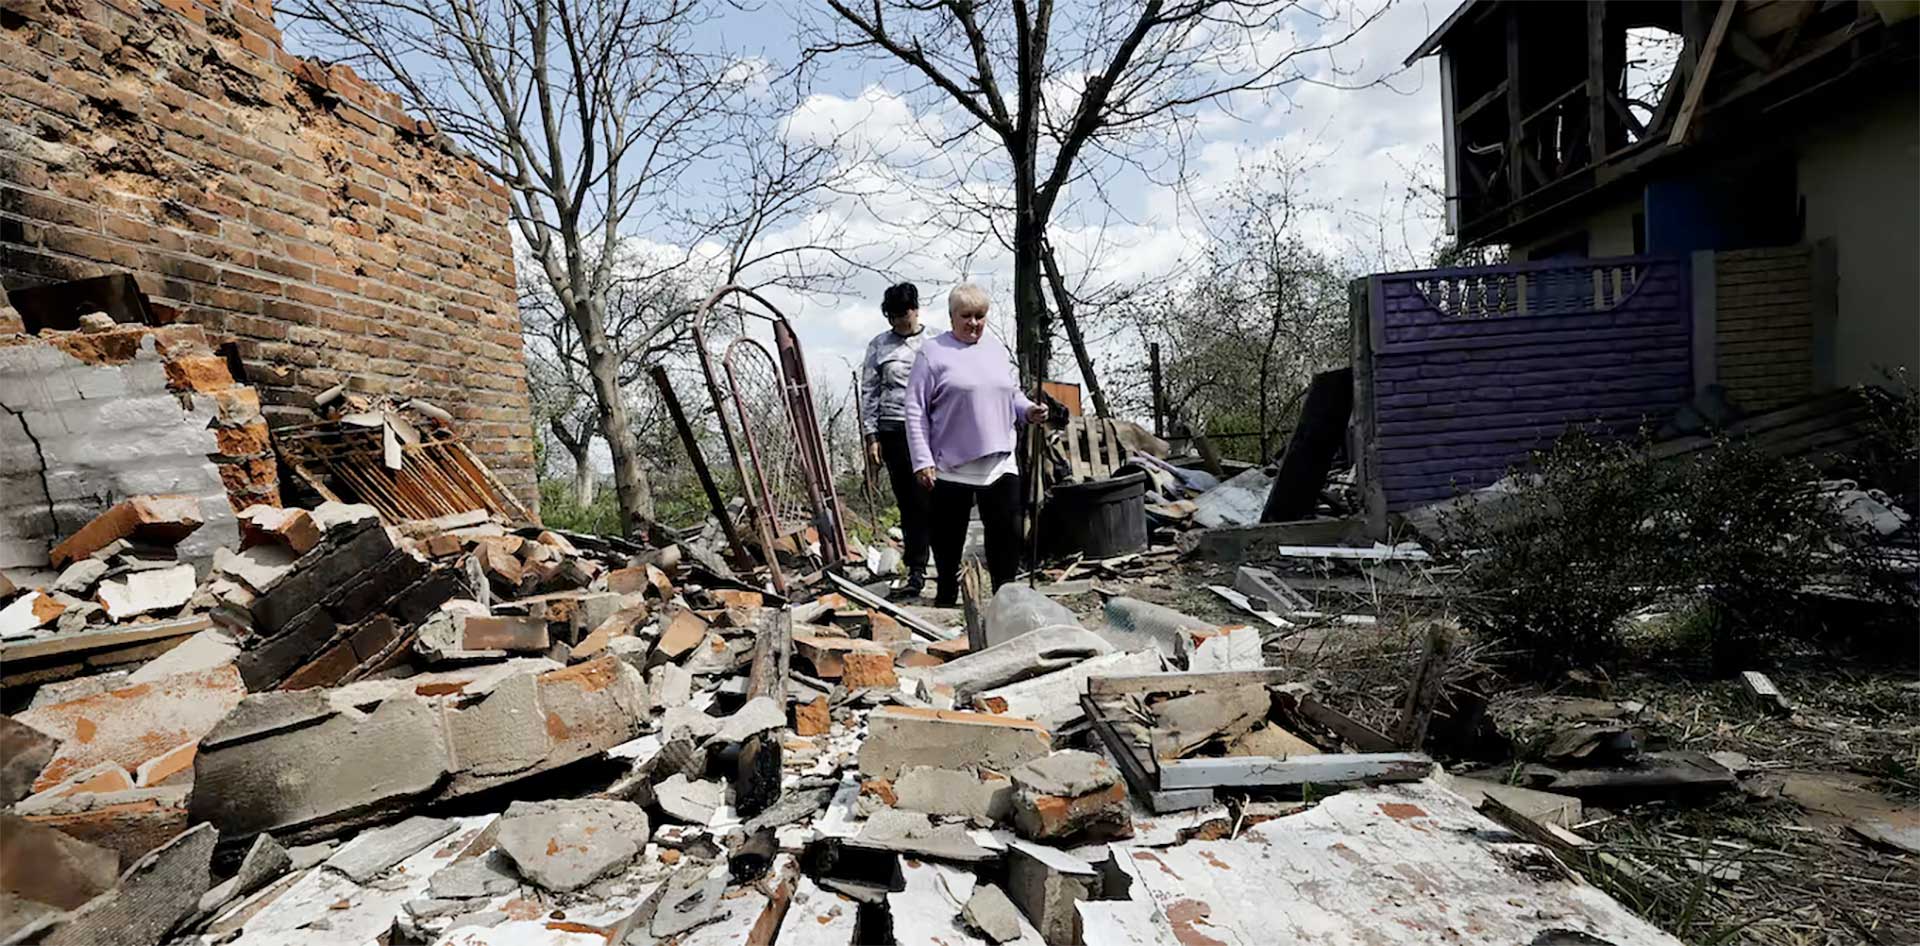 Residents in Poltava, Ukraine, survey the damage from a Russian attack. Dogukan Keskinkilic/Anadolu Agency via Getty Images